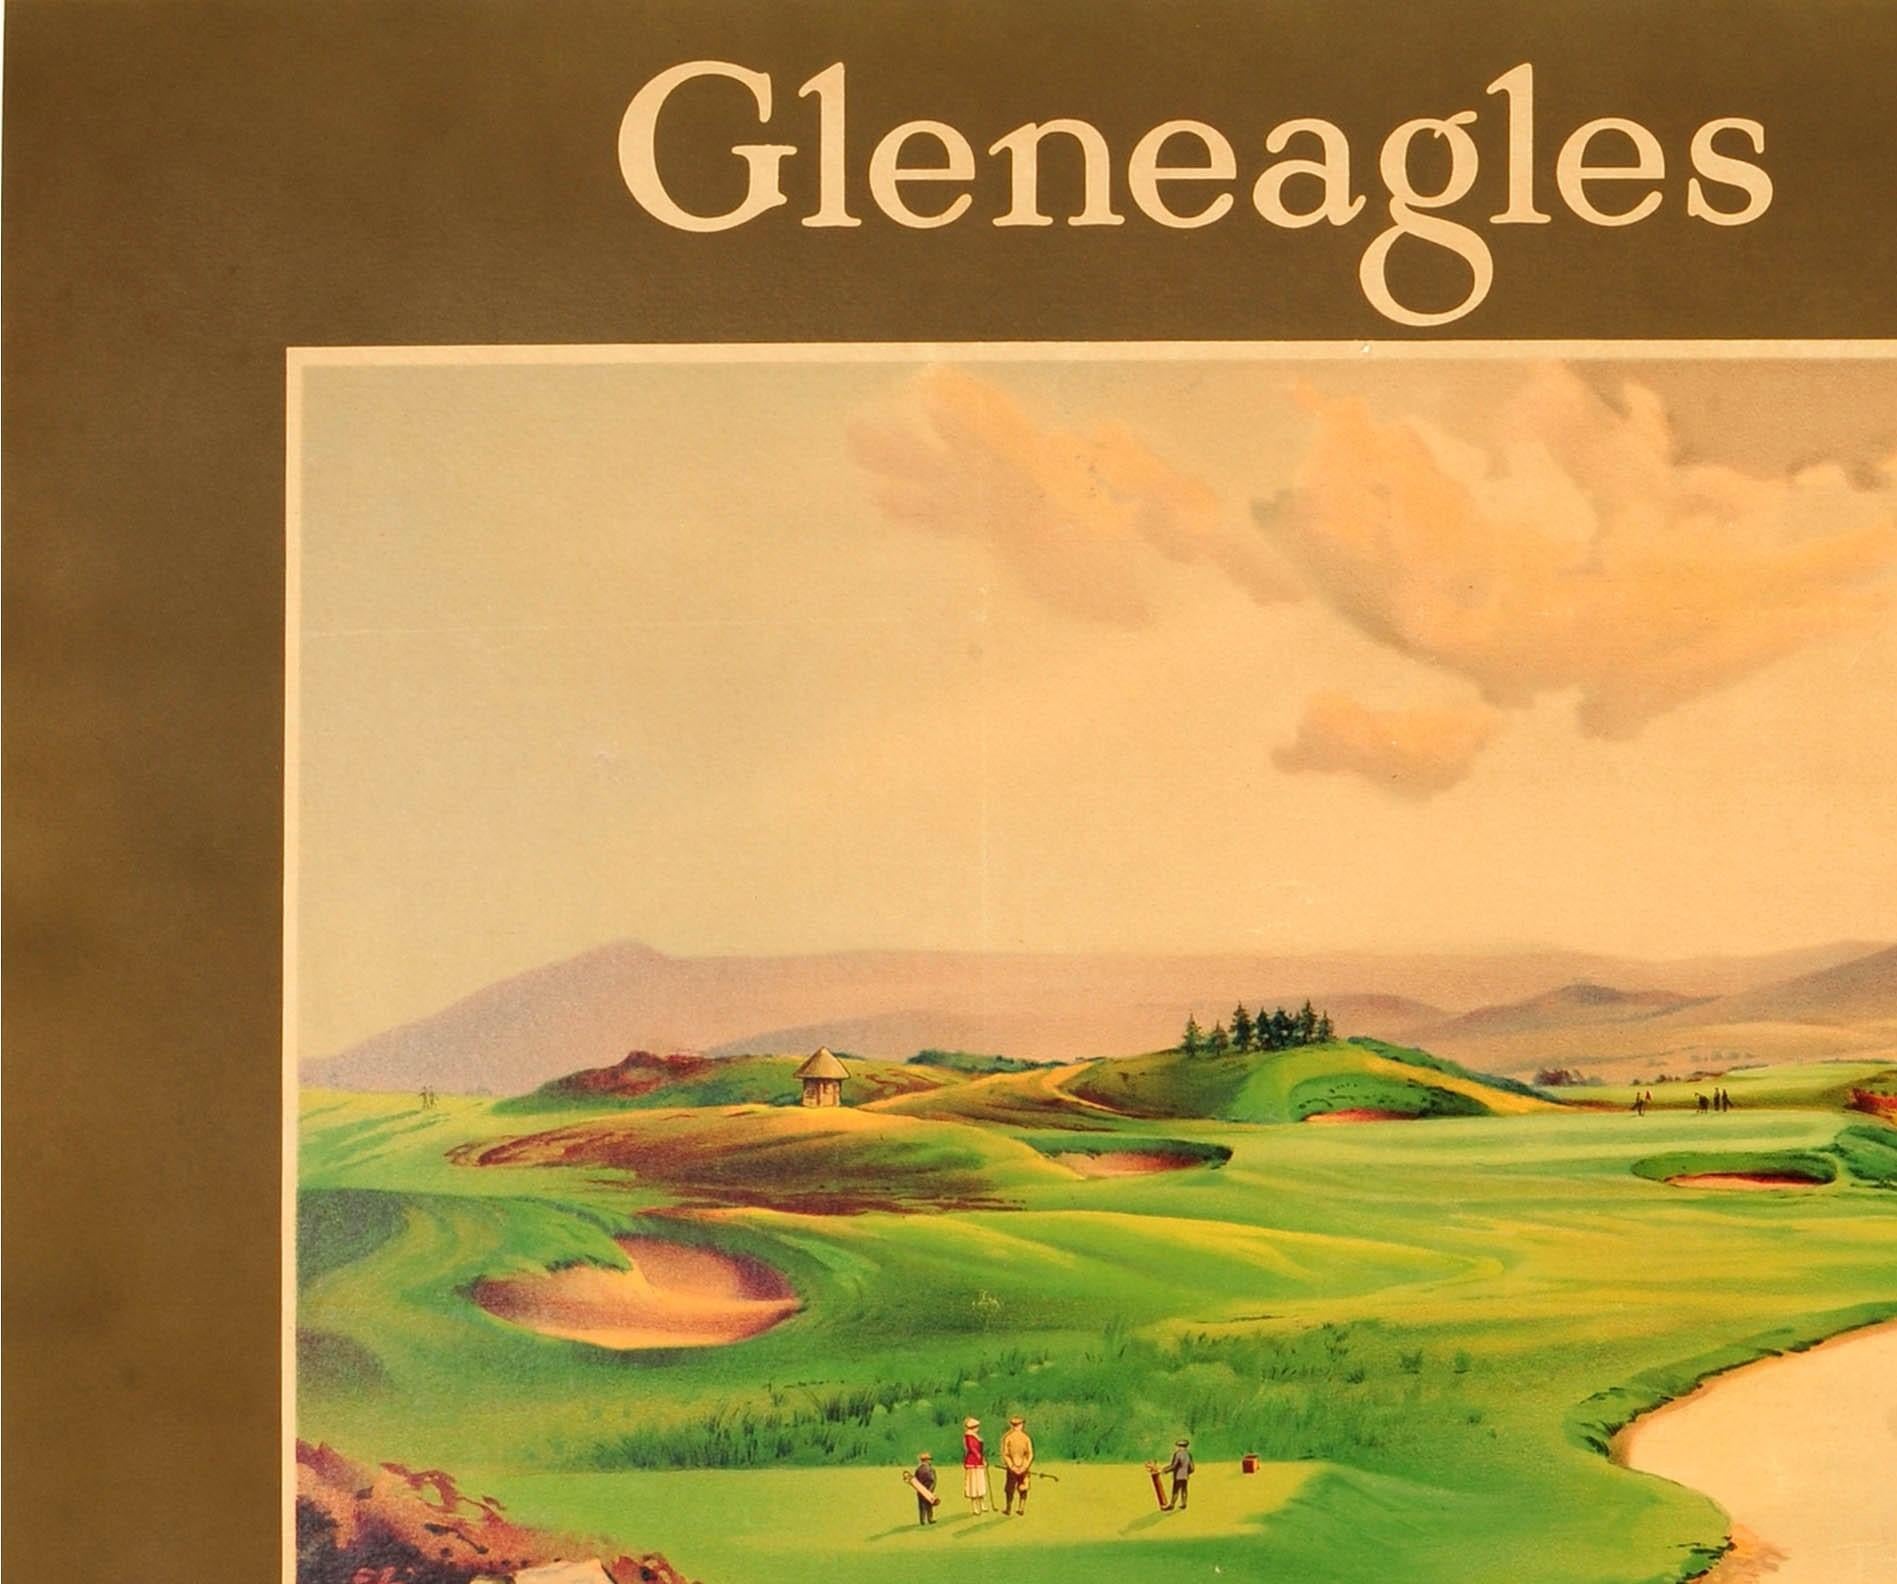 Original antique travel poster published by the Caledonian Railway promoting Gleneagles Golf Course the 